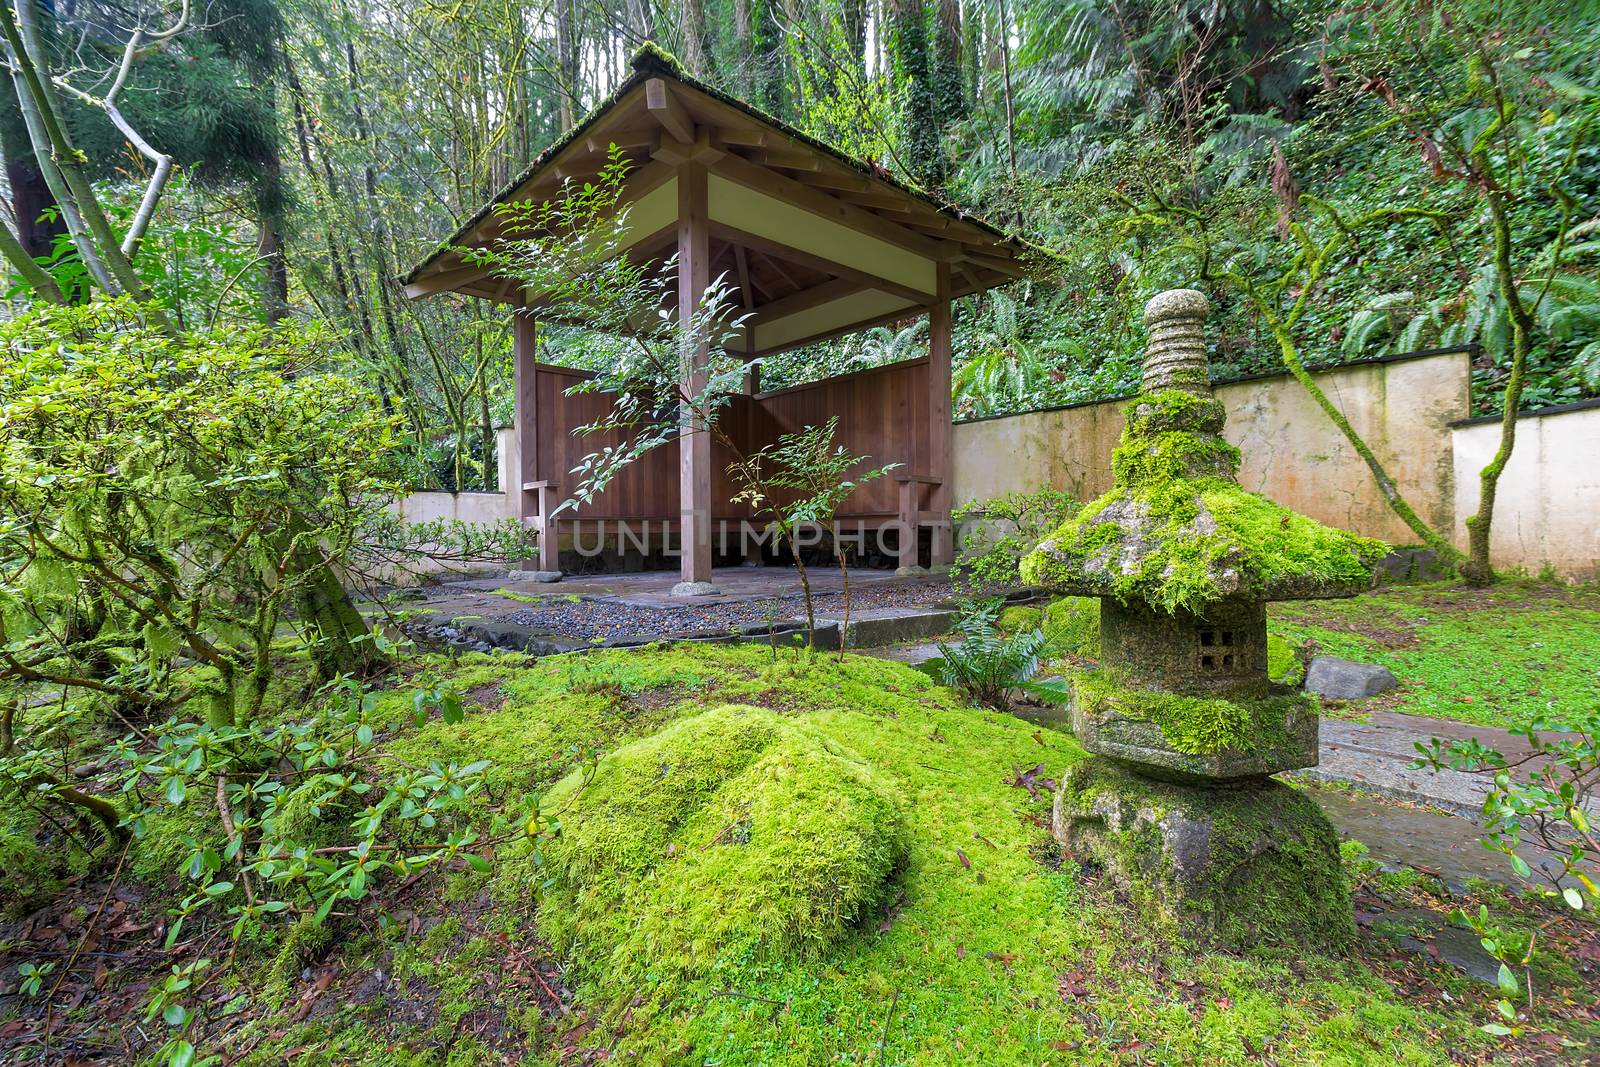 Wood Shelter by Stone Lantern covered in green moss at Japanese Garden during Spring Season